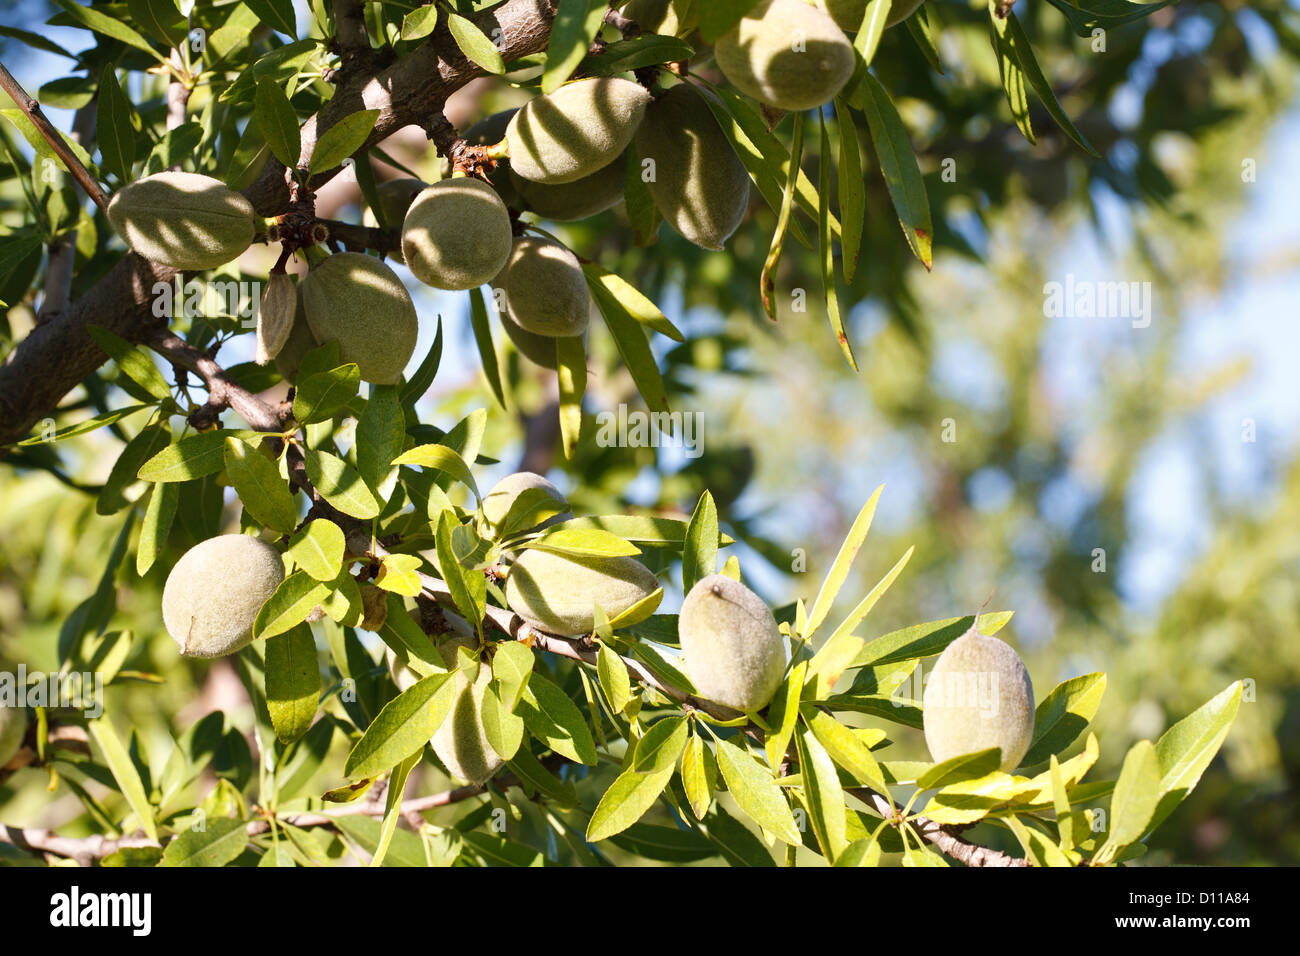 Almond (Prunus dulcis) fruit forming on trees in an orchard. Bouches-du-Rhône, Provence, France. June. Stock Photo